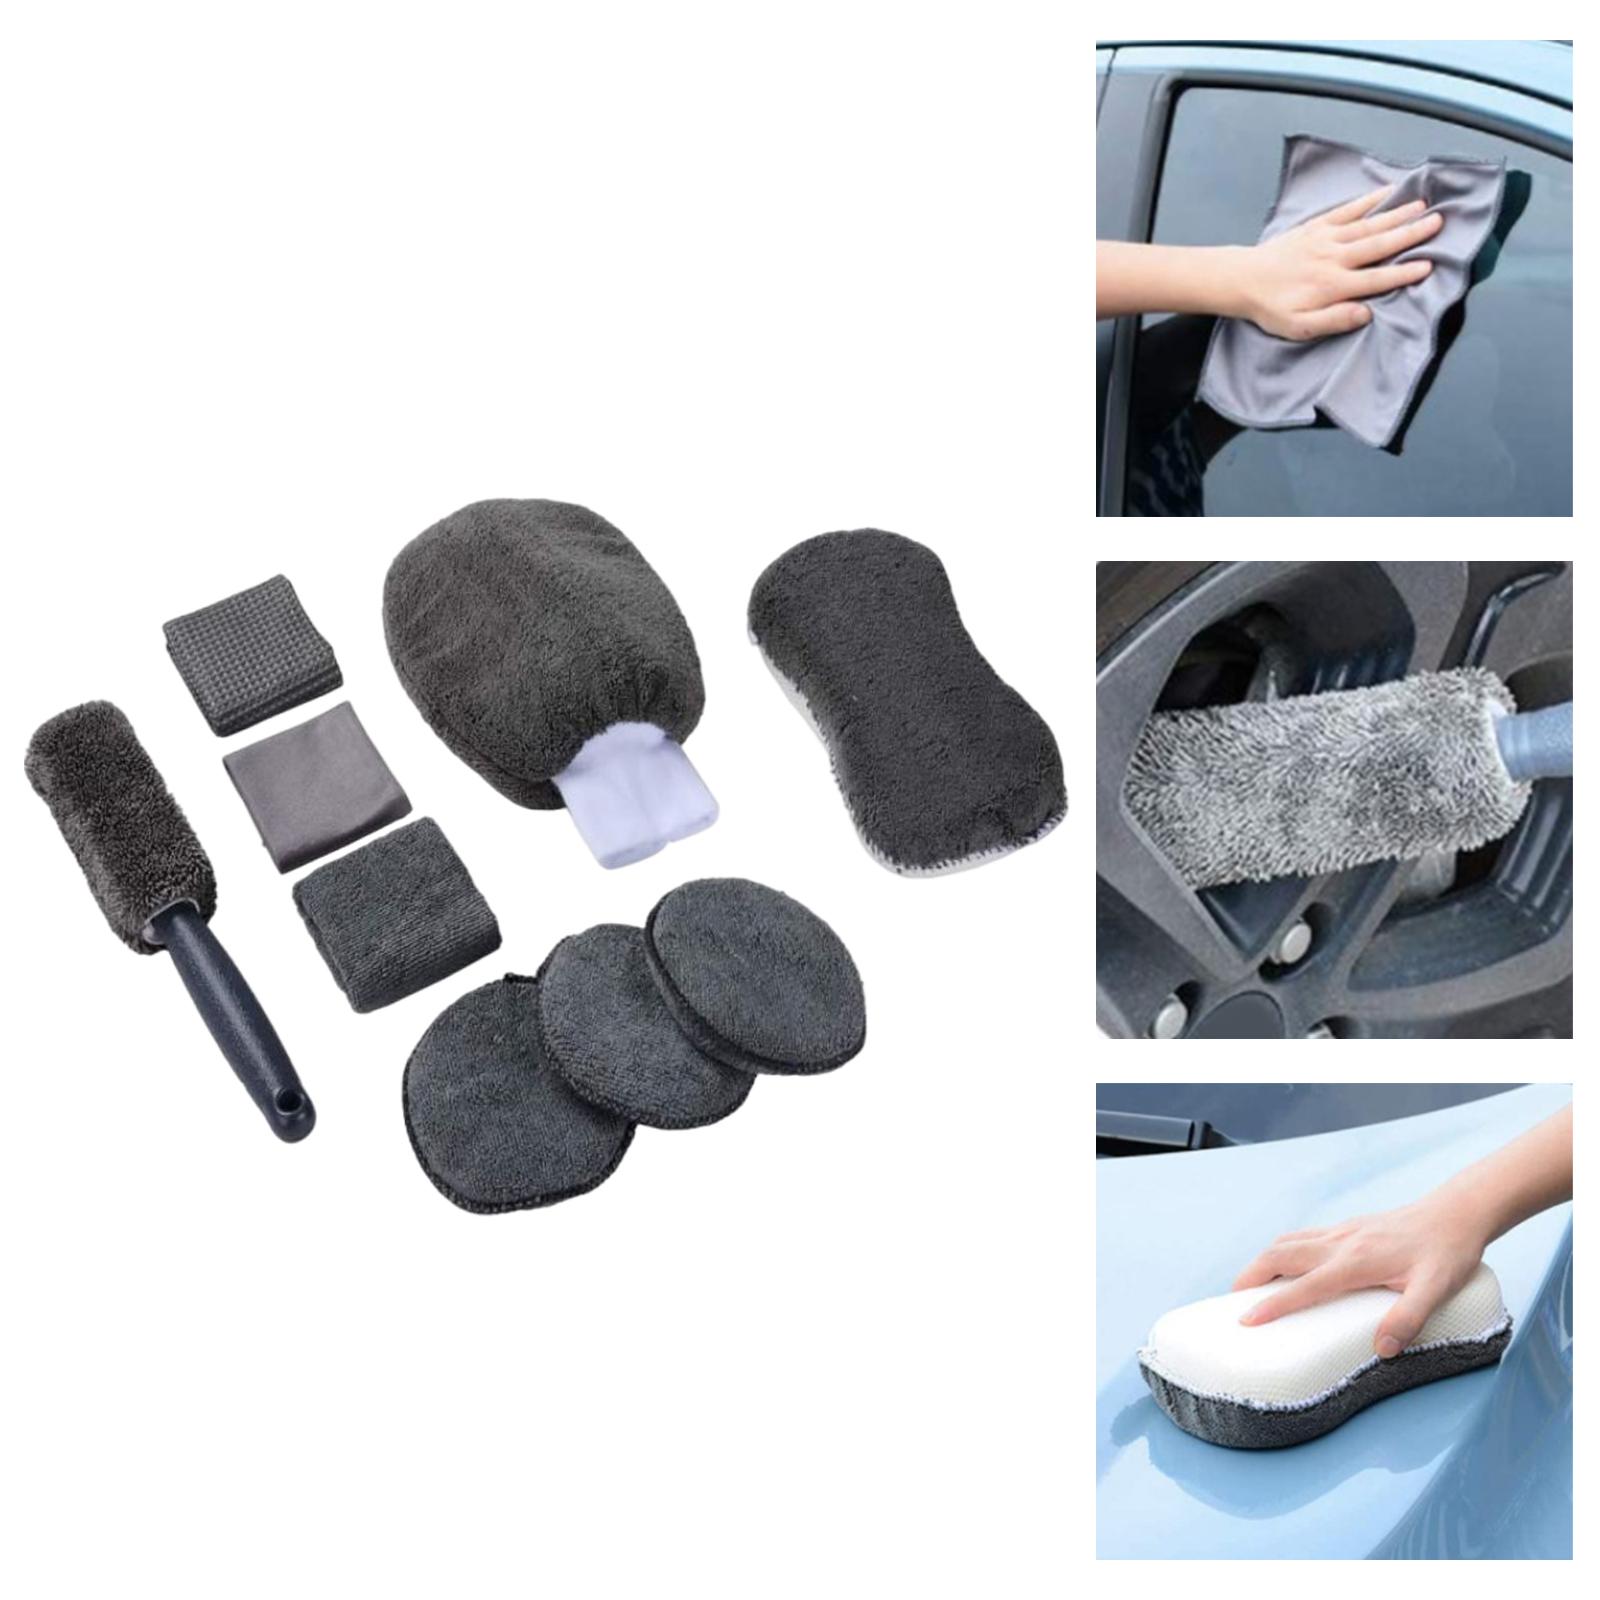 9x Car Cleaning Kit for Cleaning Wheels